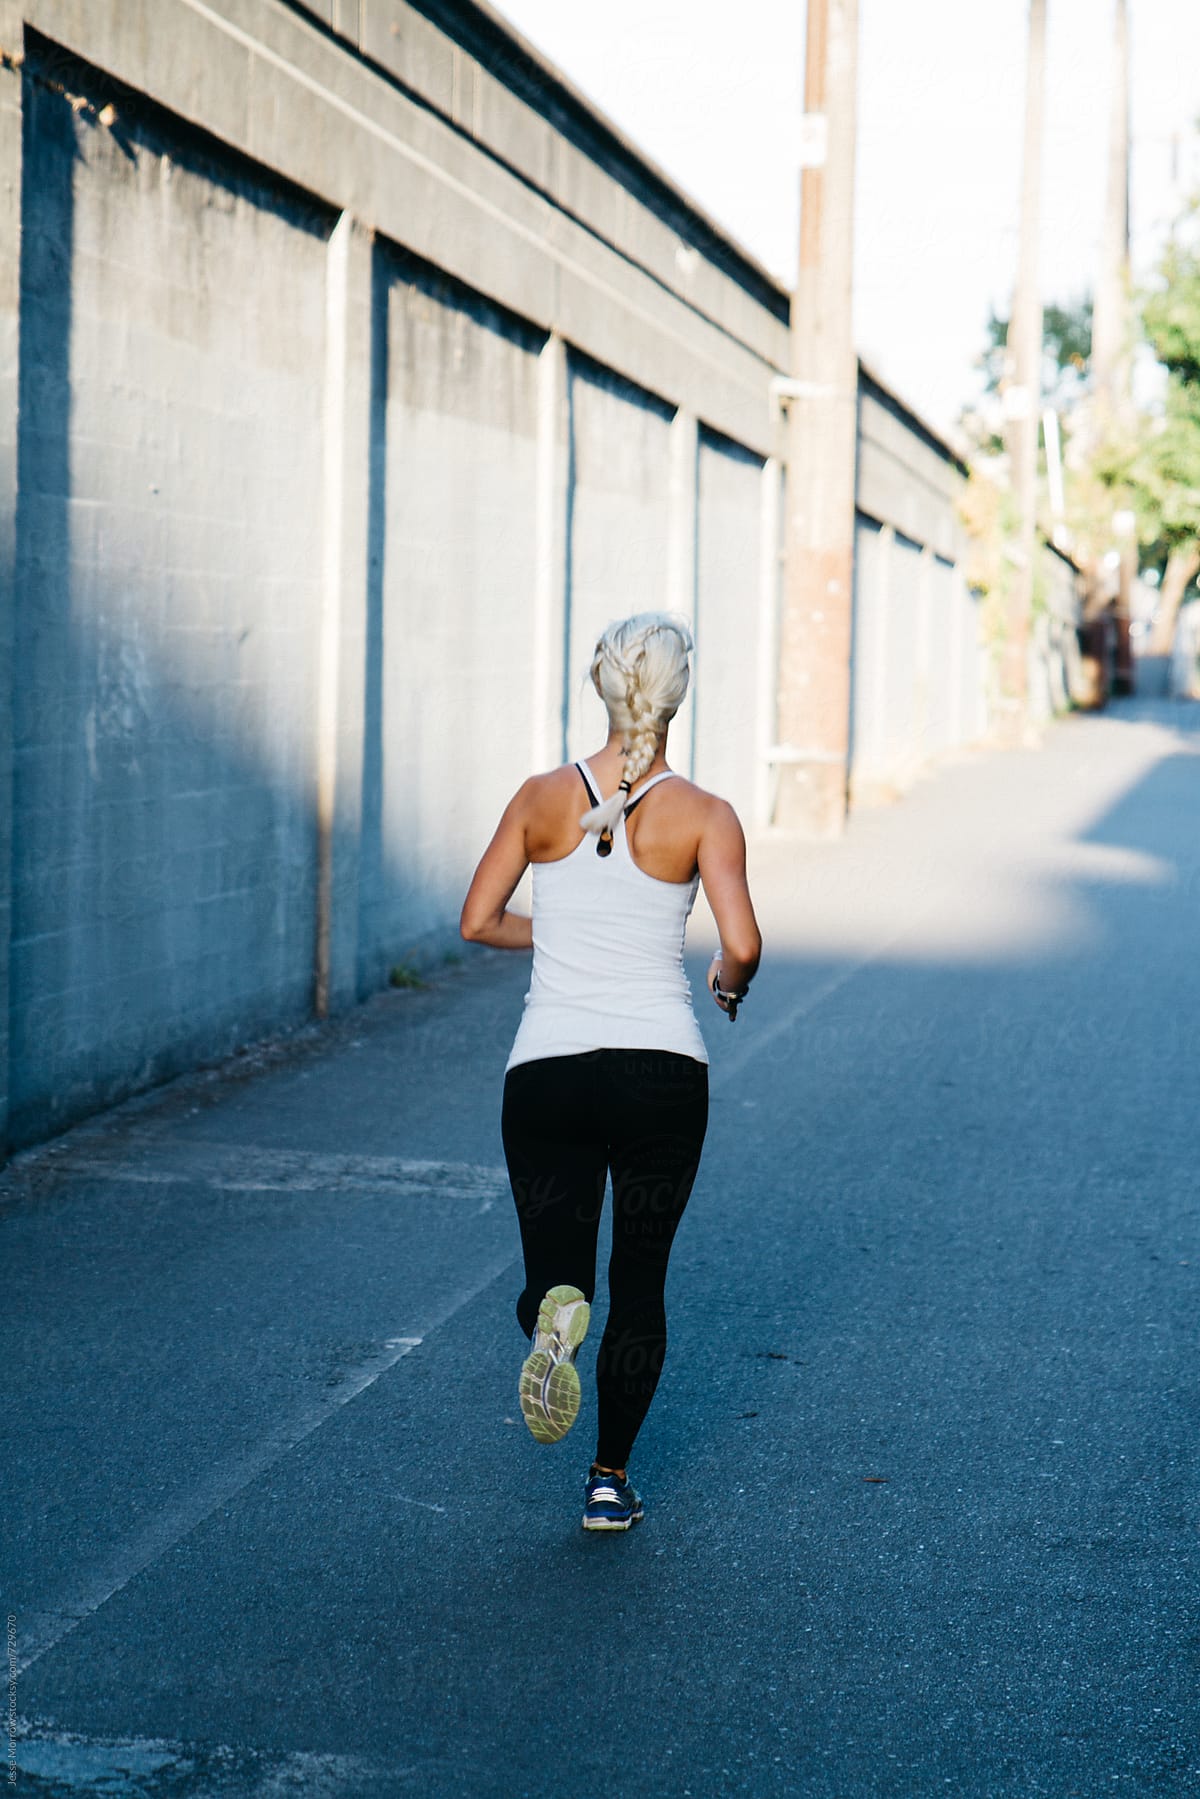 Young Woman Running In Fitness Clothing Through Urban City Environment by  Stocksy Contributor Jesse Morrow - Stocksy